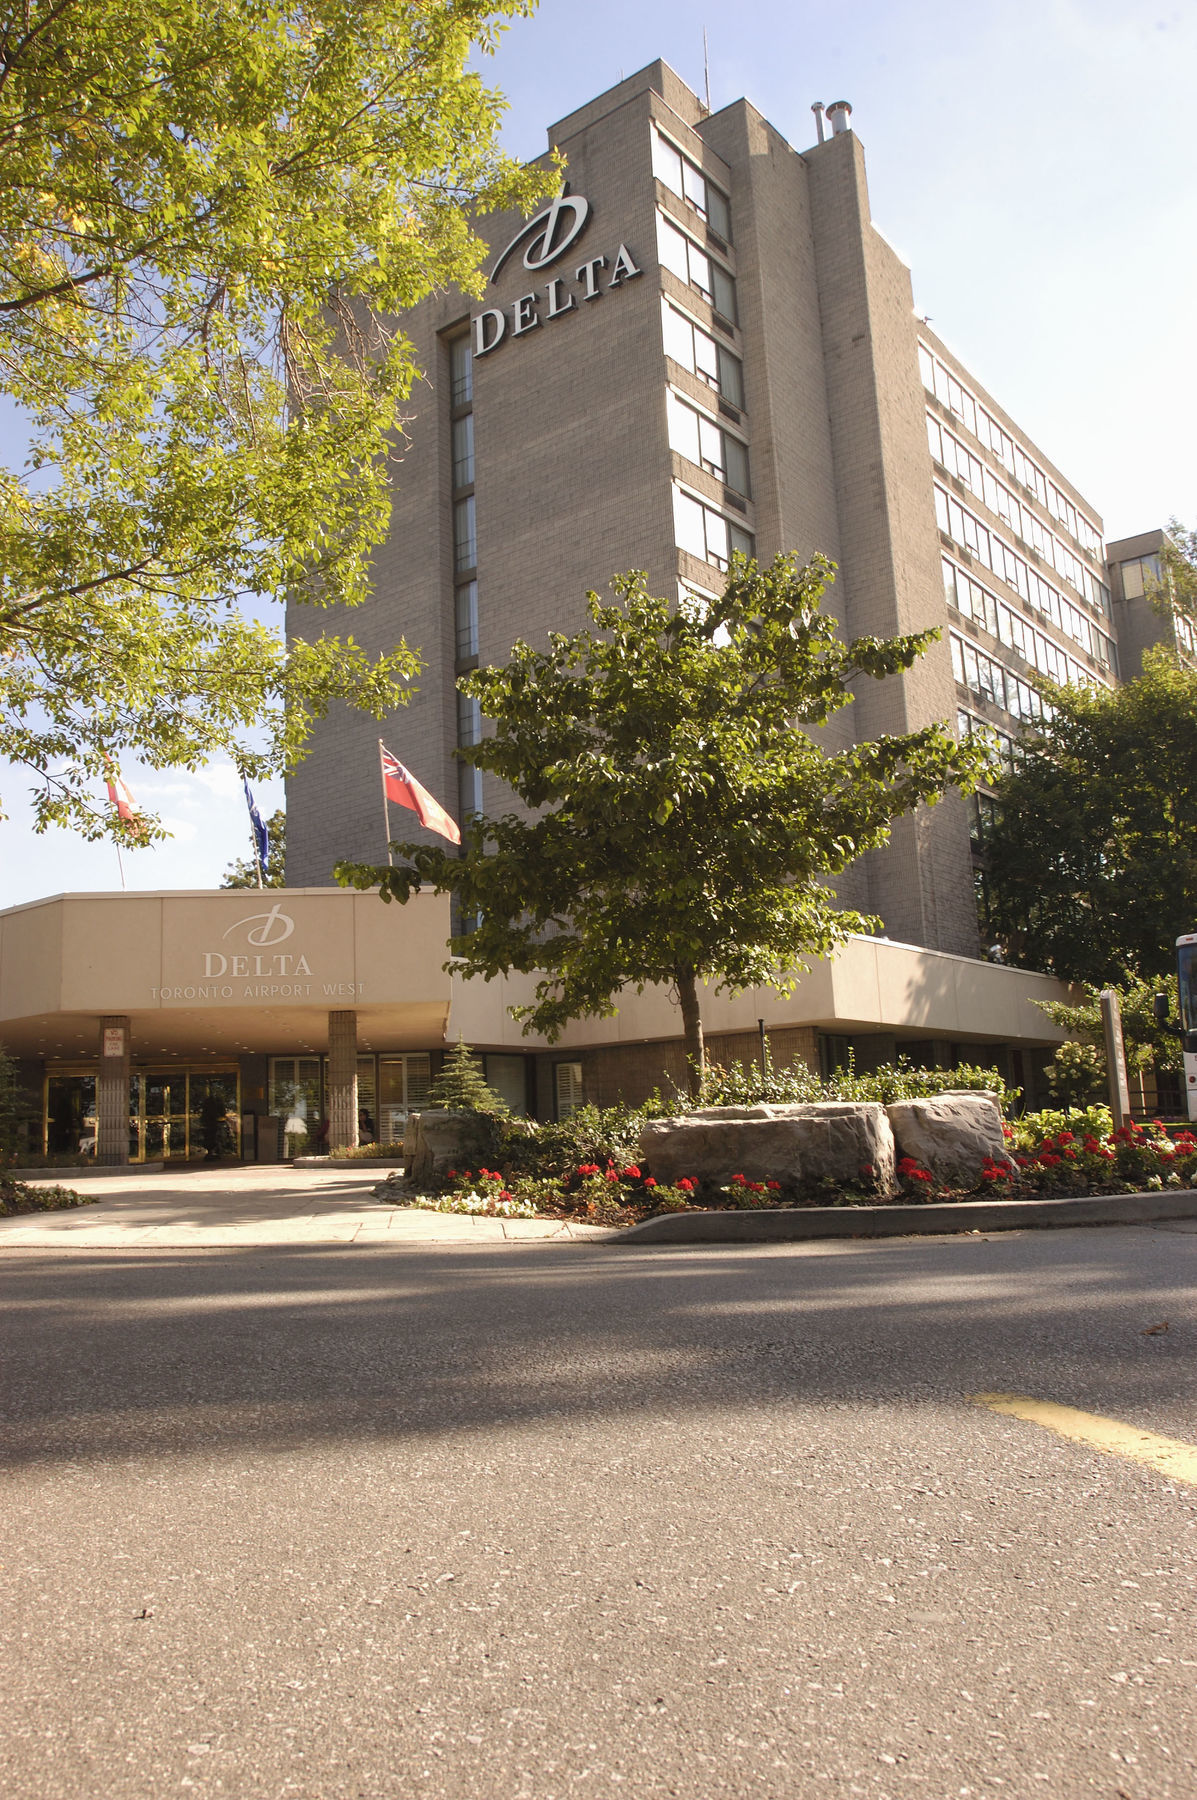 Doubletree By Hilton Hotel Toronto Airport West Mississauga Exterior foto